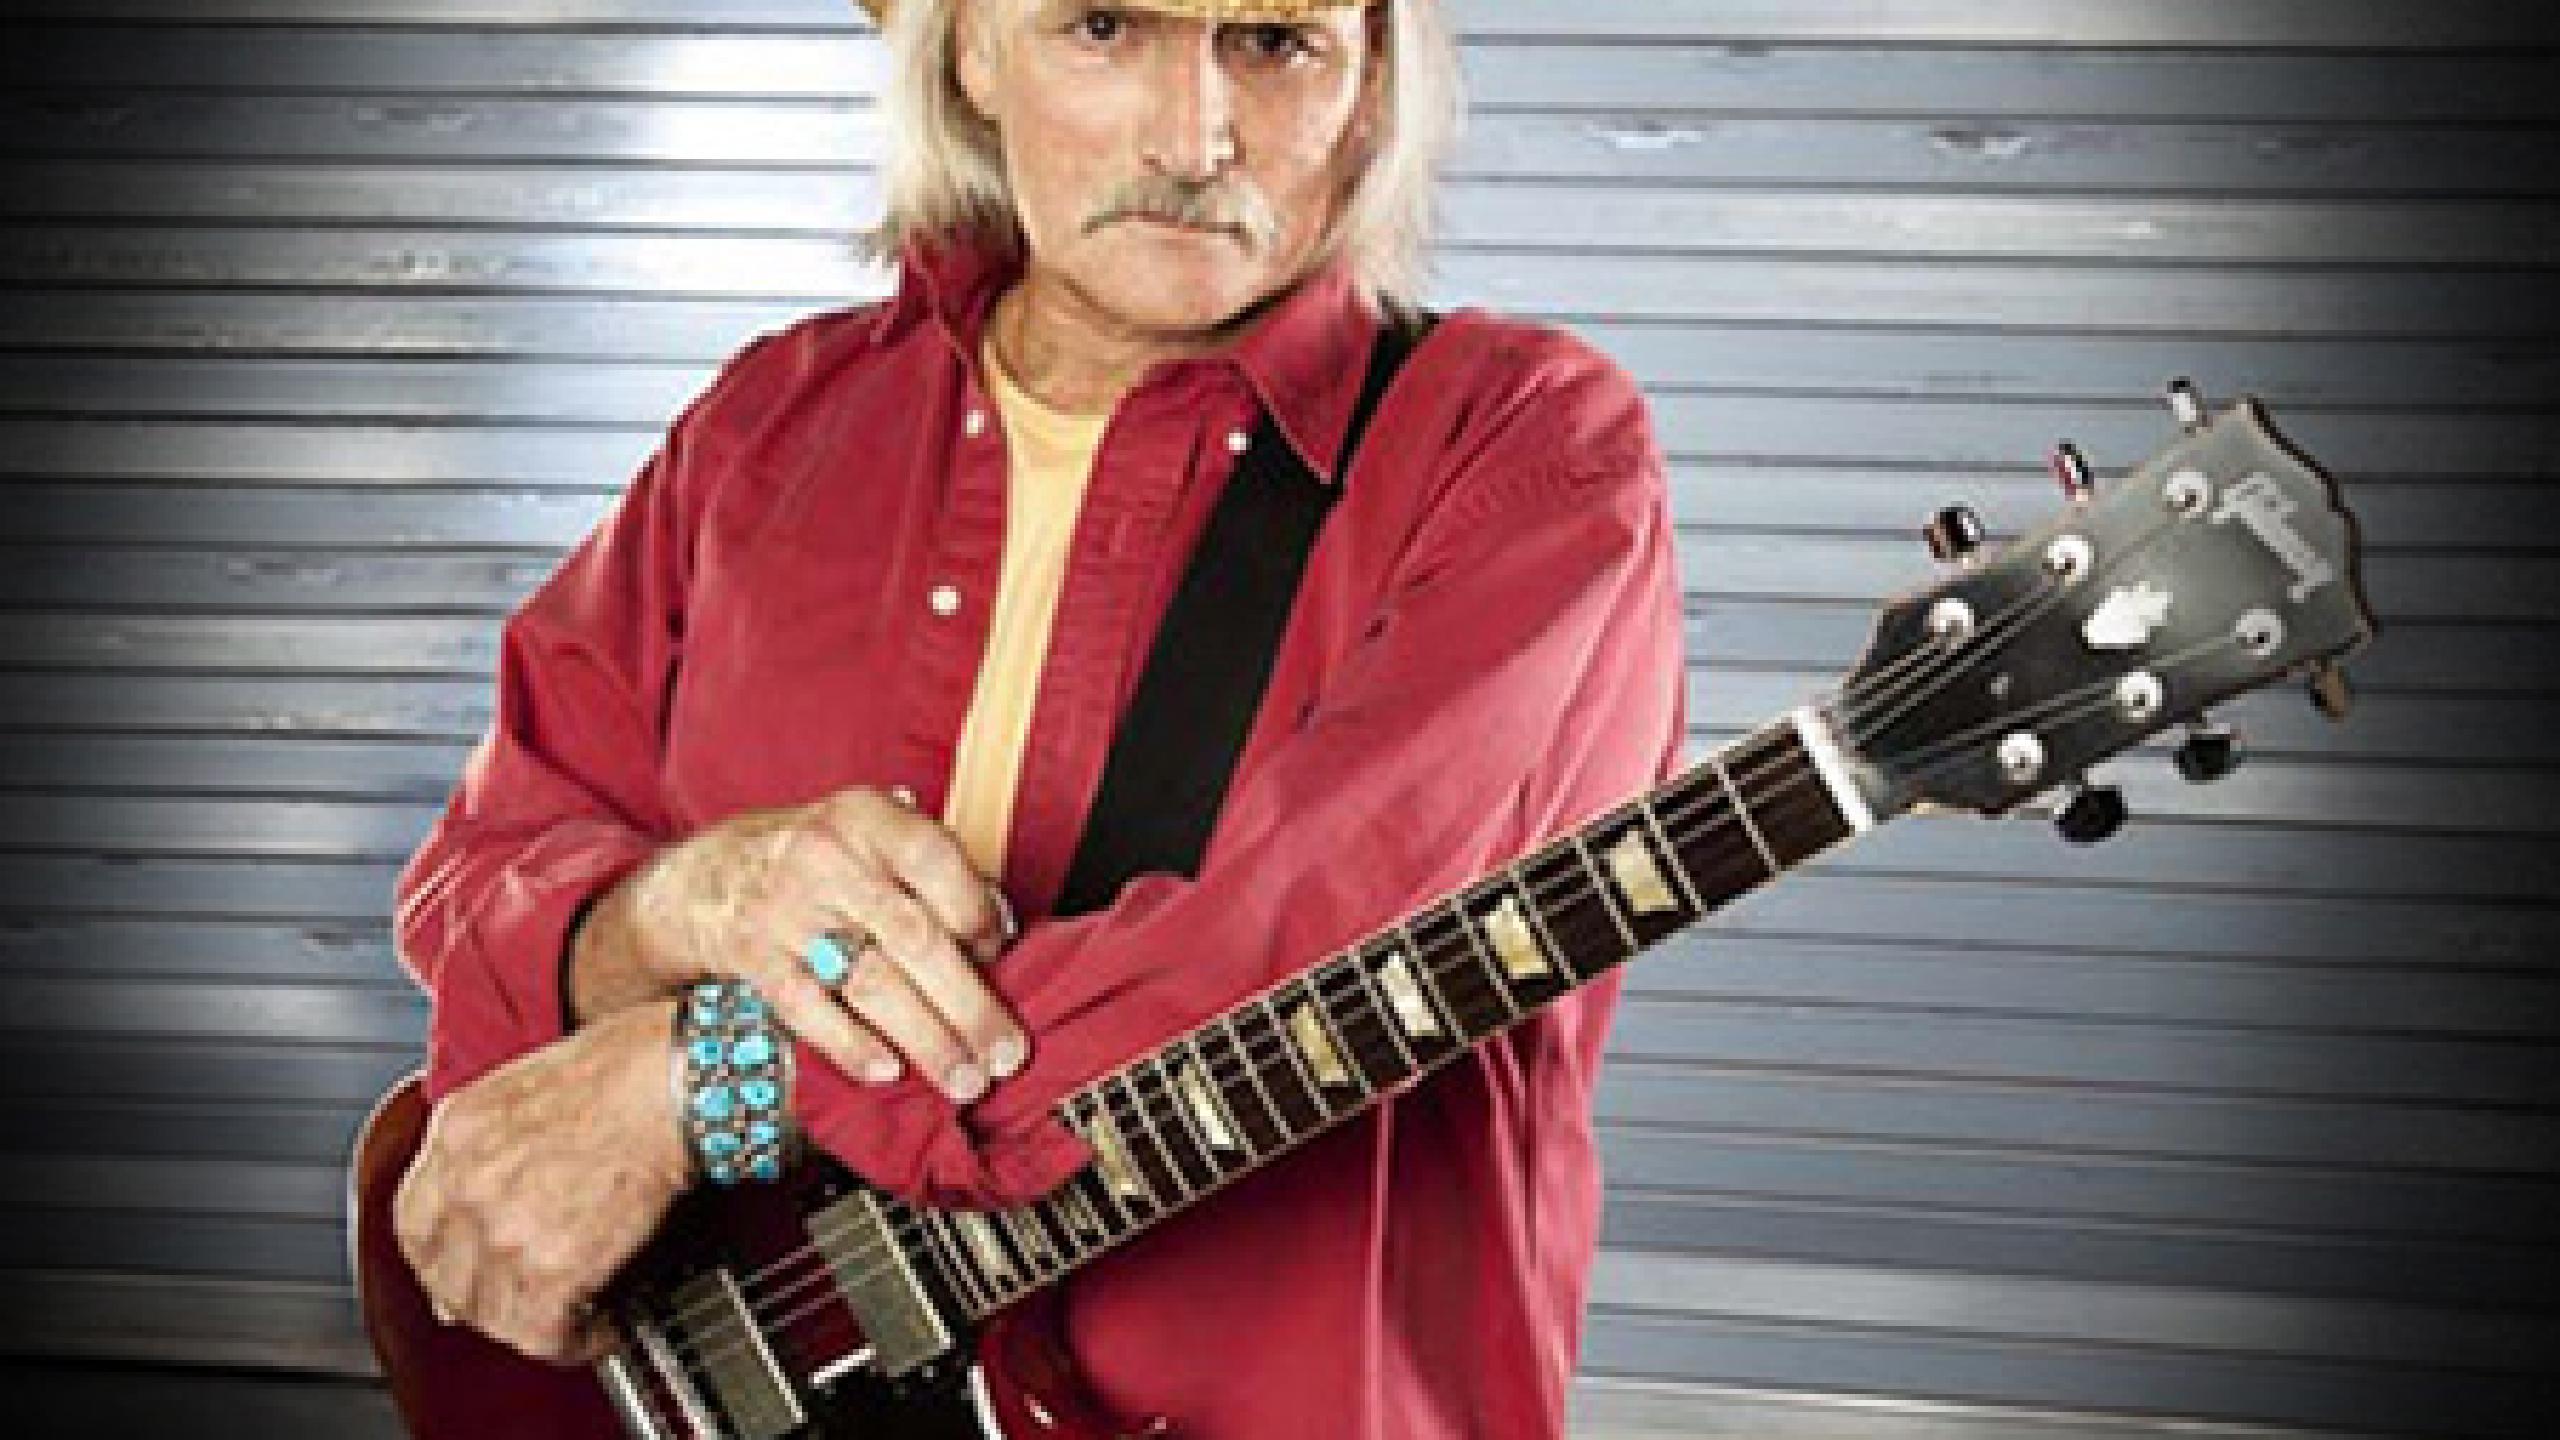 Dickey Betts tour dates 2022 2023. Dickey Betts tickets and concerts